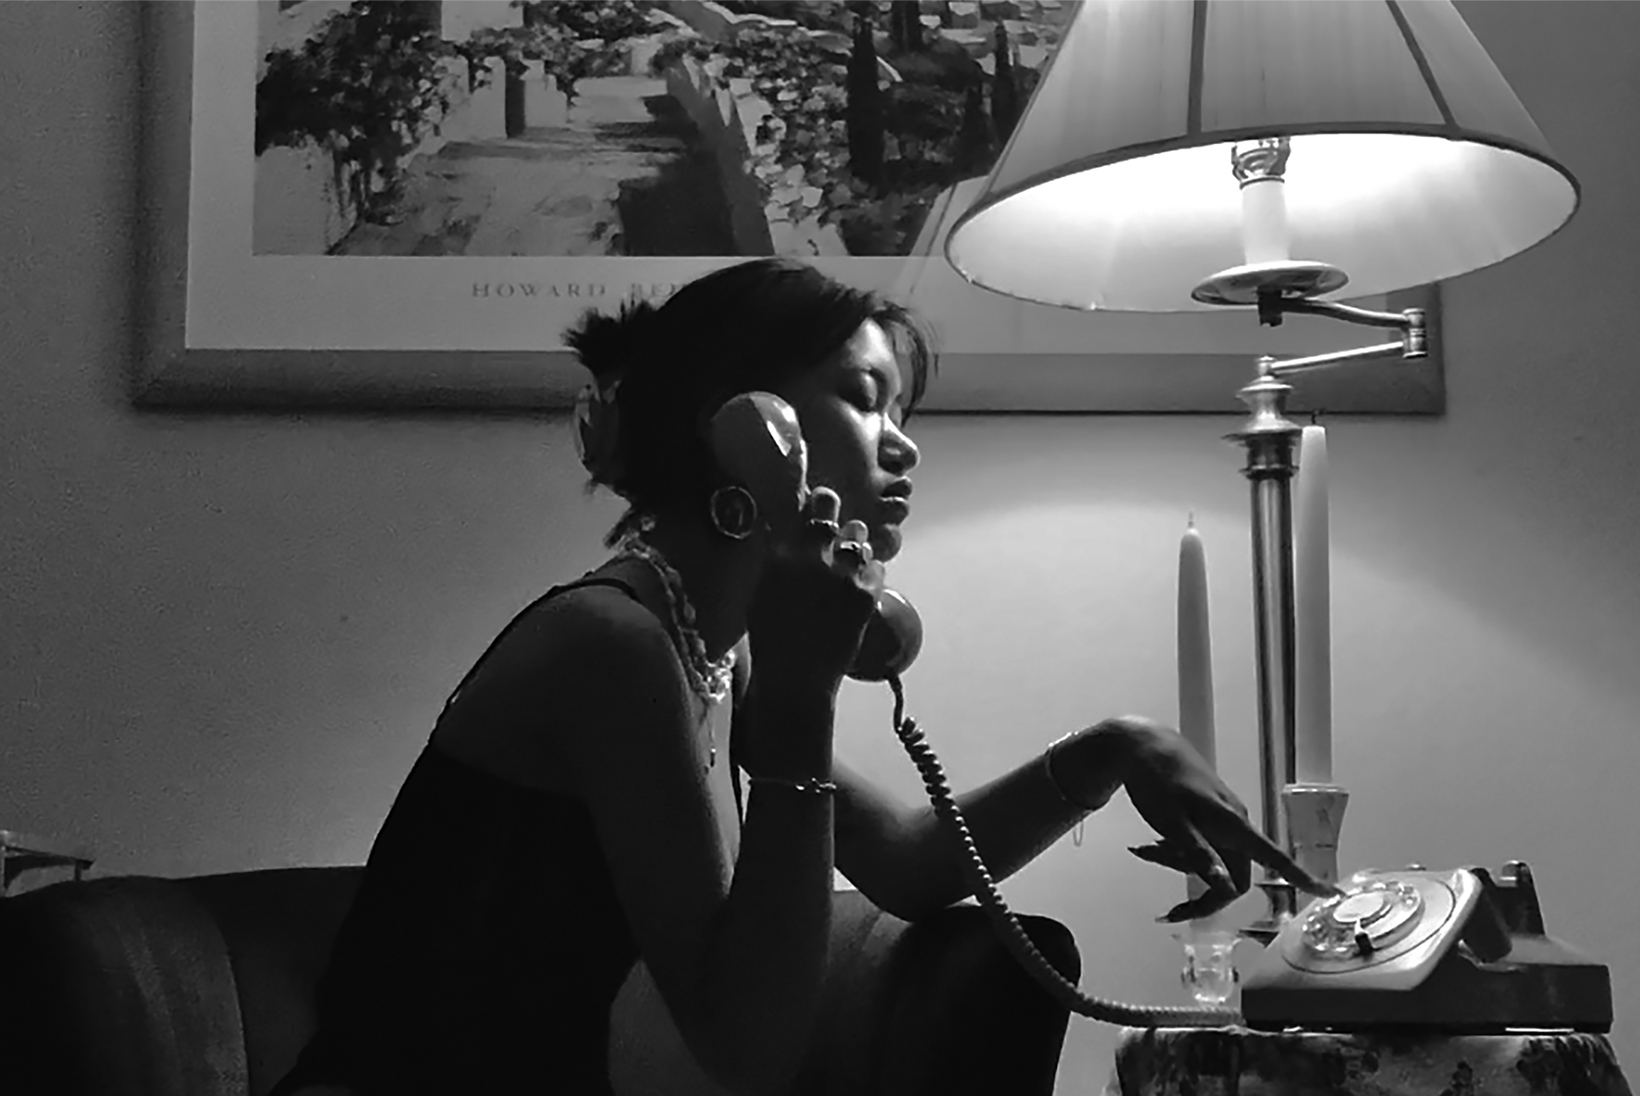 A woman sits on a living-room chair next to a table with a lamp and a taper candle and dials the rotary phone on the table. She is wearing a sleeveless shirt, and her hair is pulled back and pinned up.